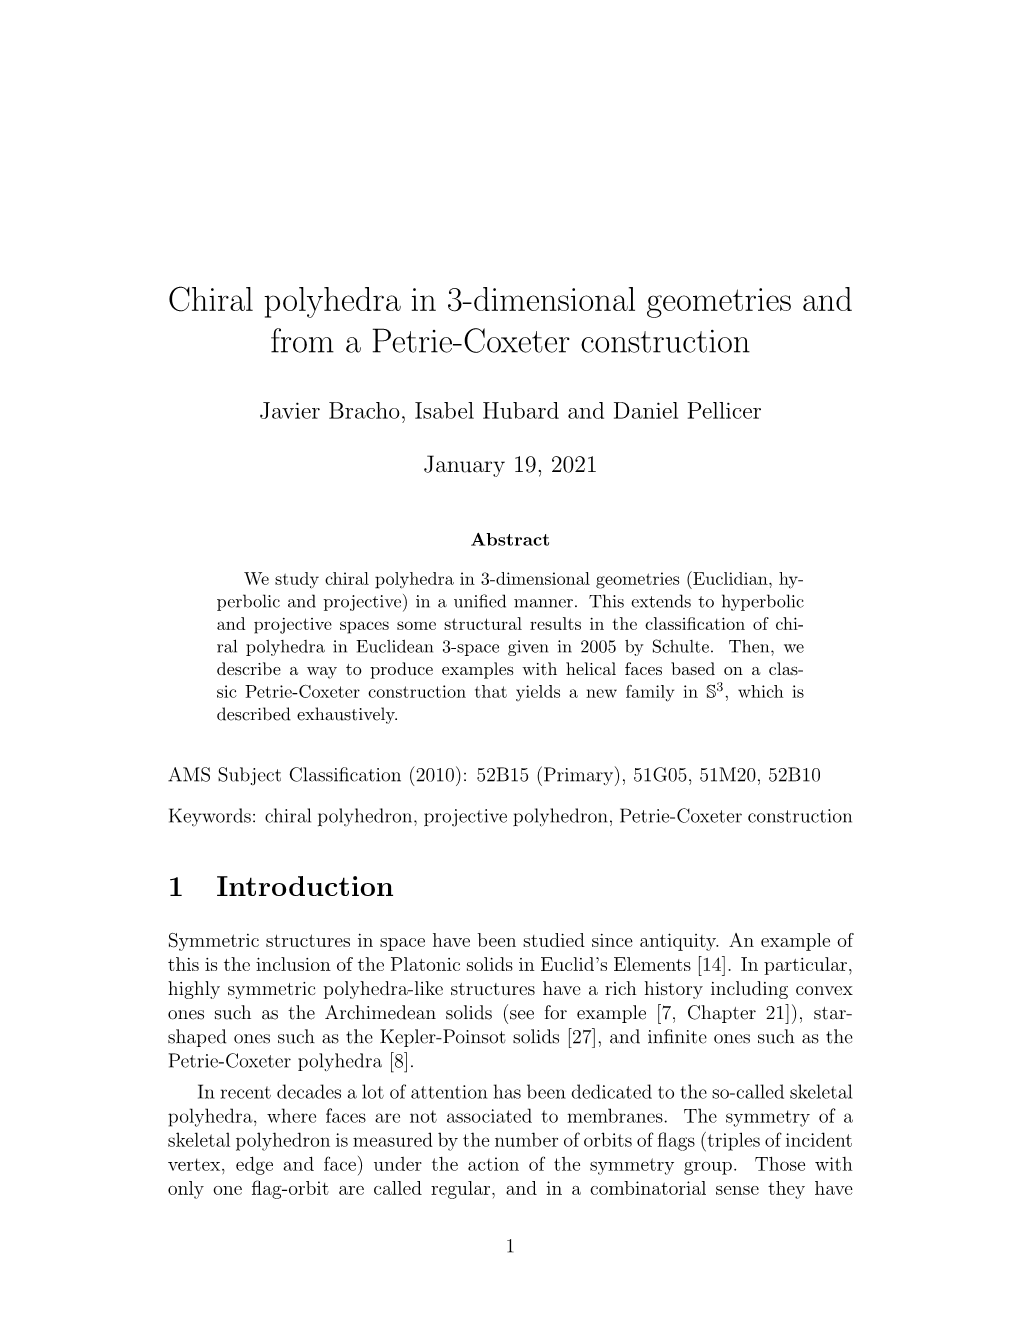 Chiral Polyhedra in 3-Dimensional Geometries and from a Petrie-Coxeter Construction